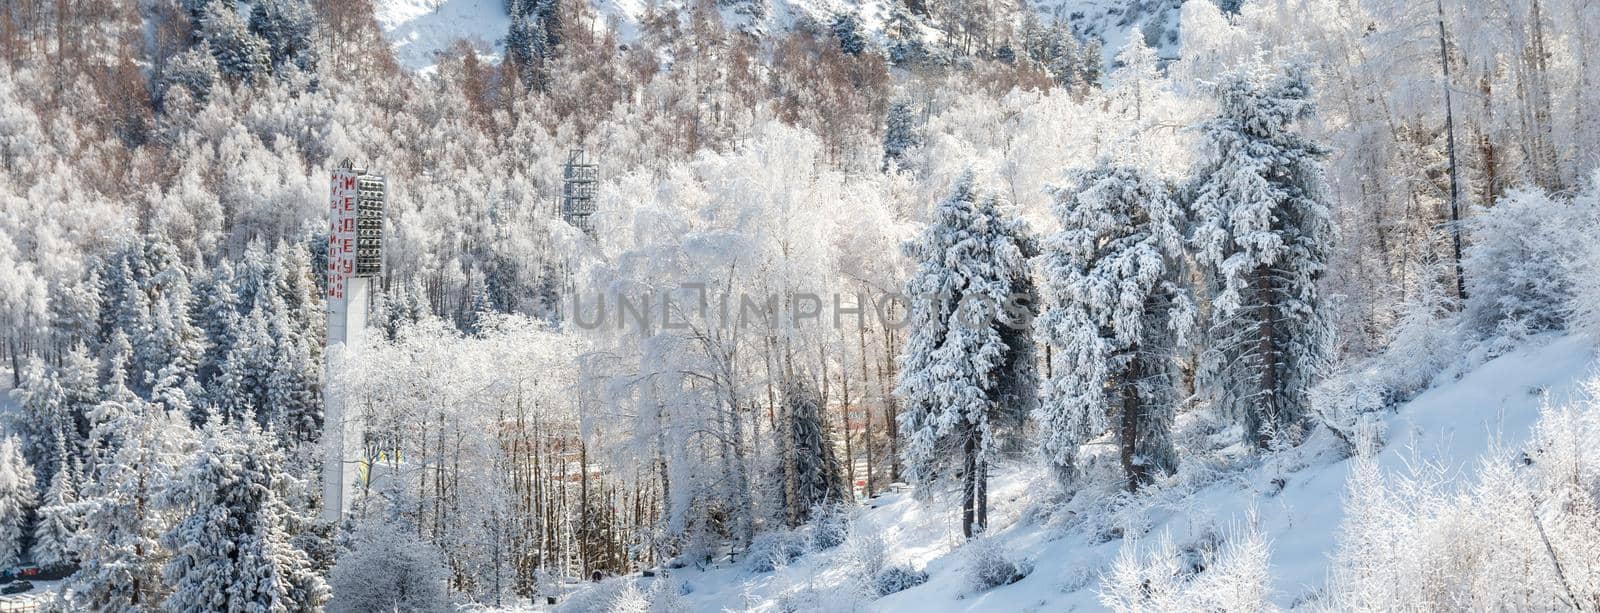 Almaty, Kazakhstan - March 16, 2021: A view from behind the fresh snowy trees to a part of the Medeu ice rink